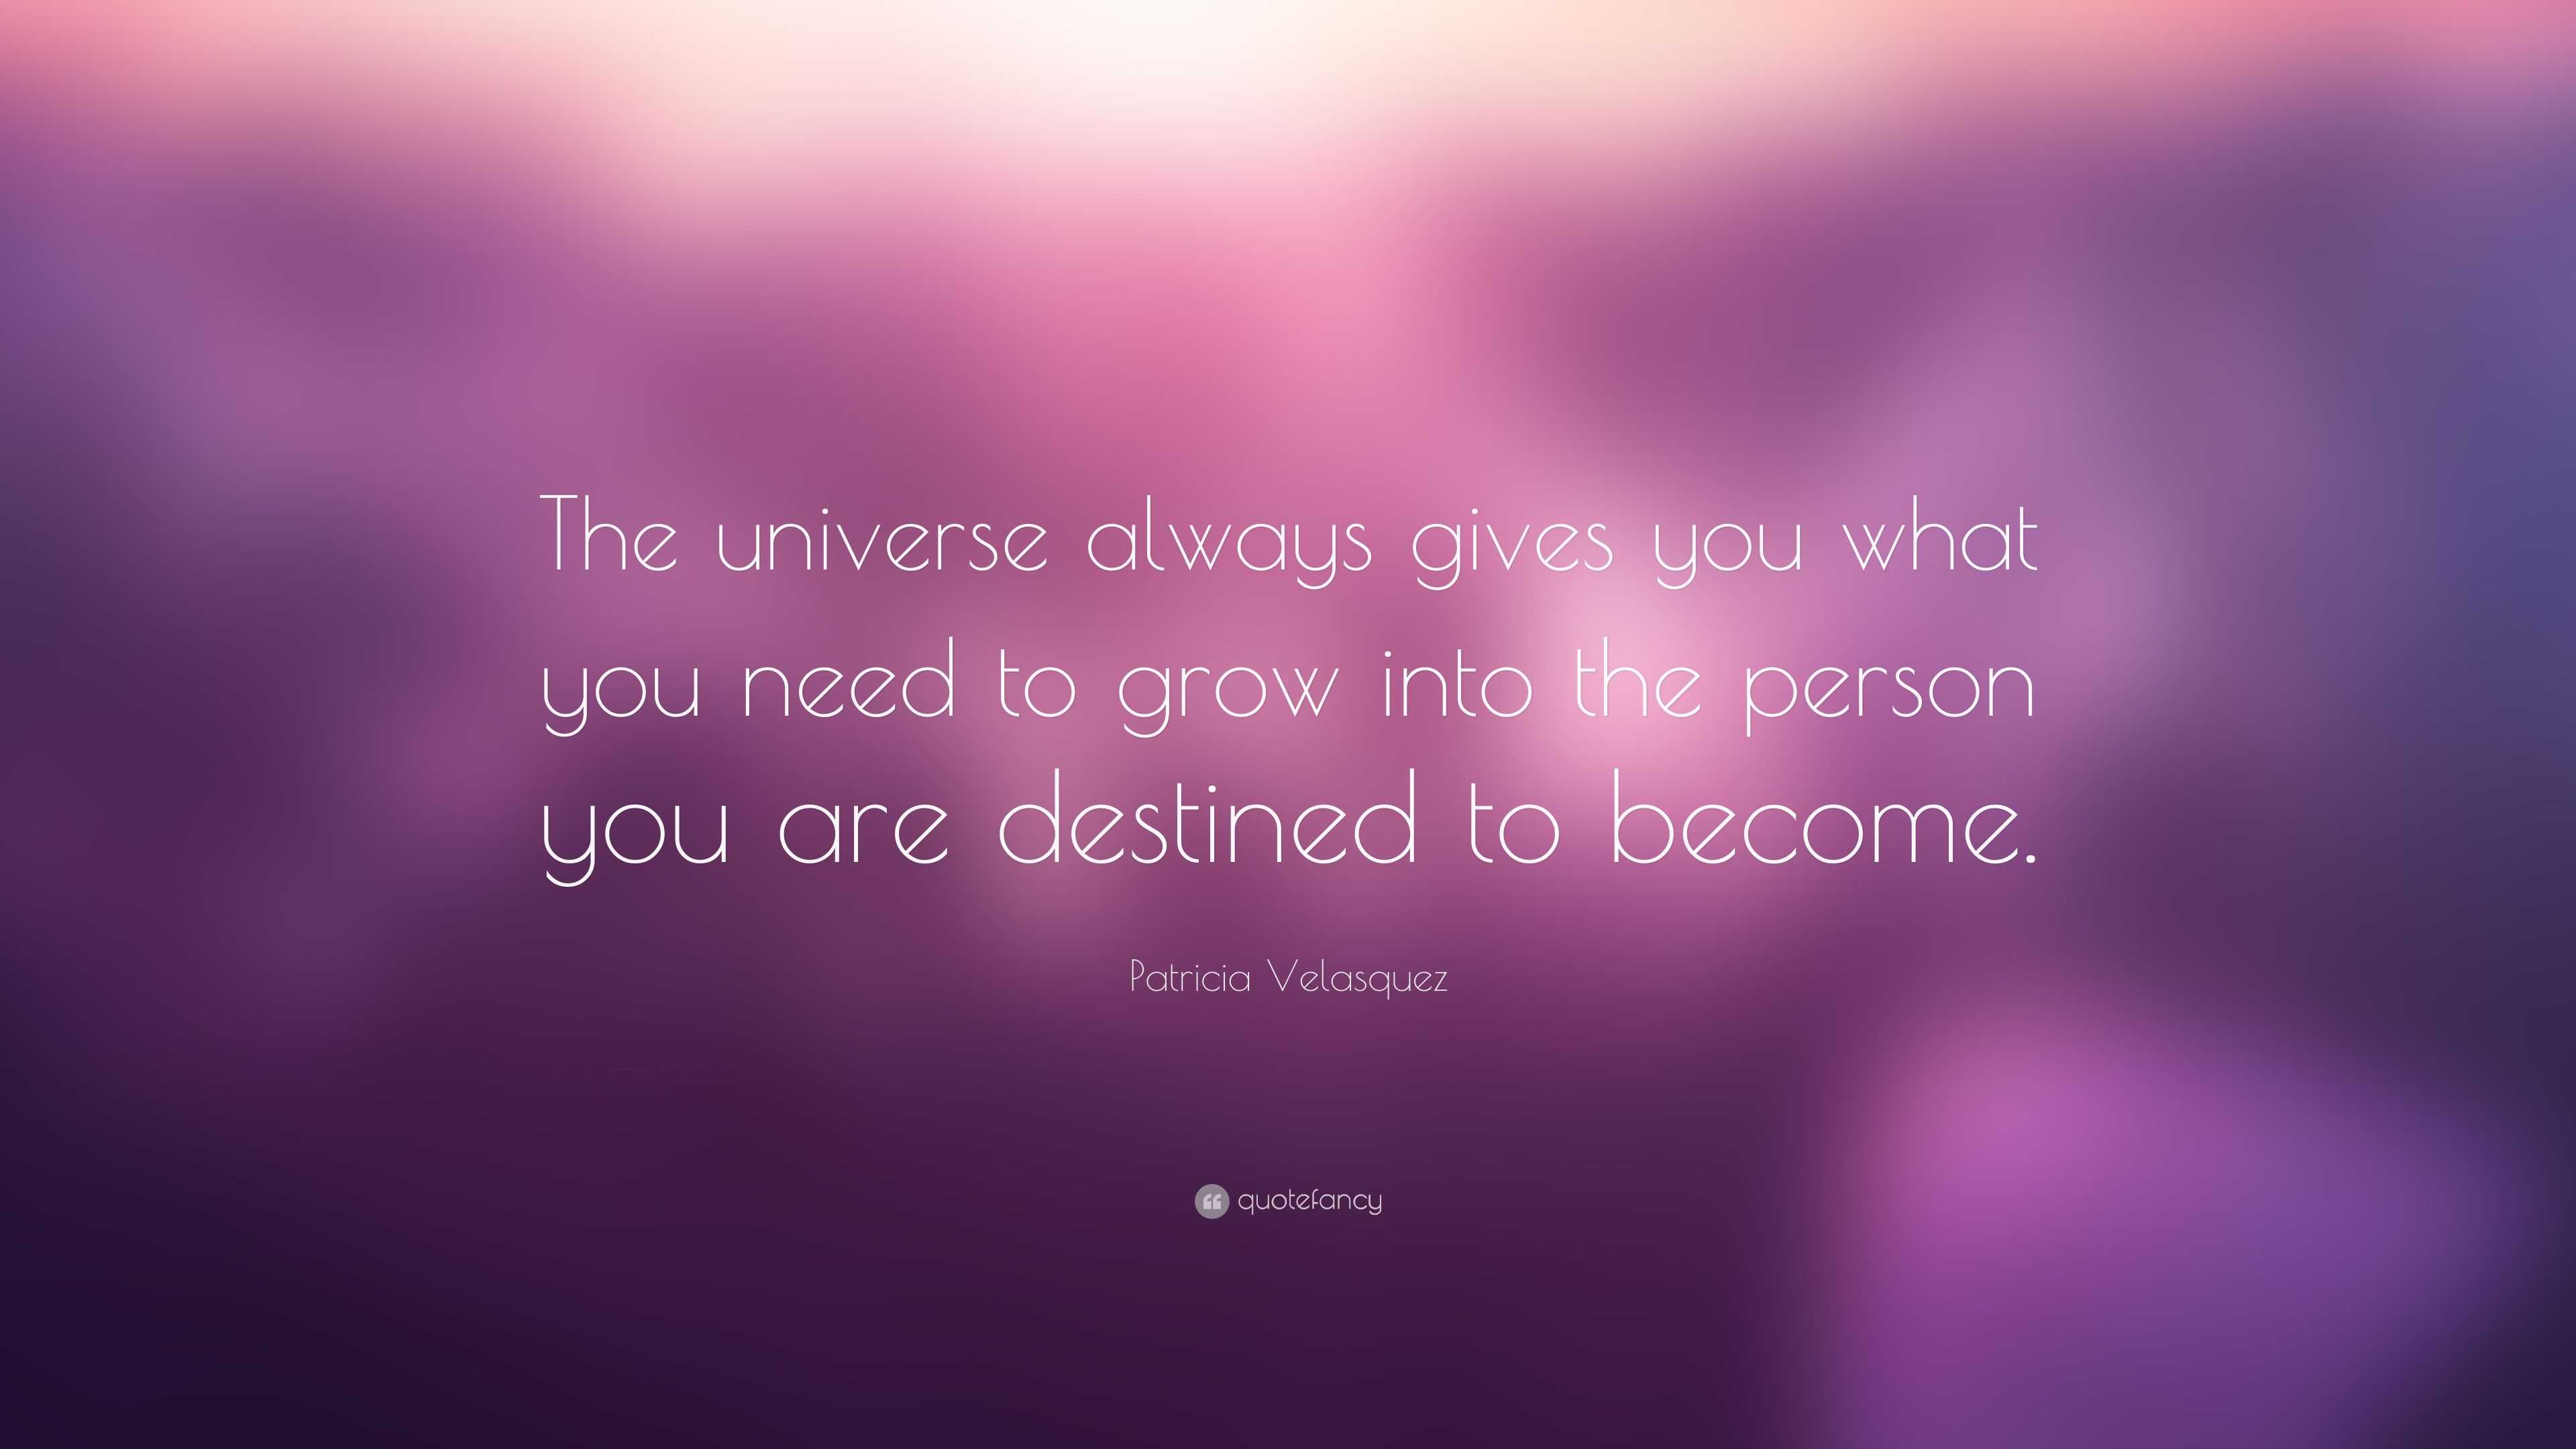 Patricia Velasquez Quote: “The universe always gives you what you need ...